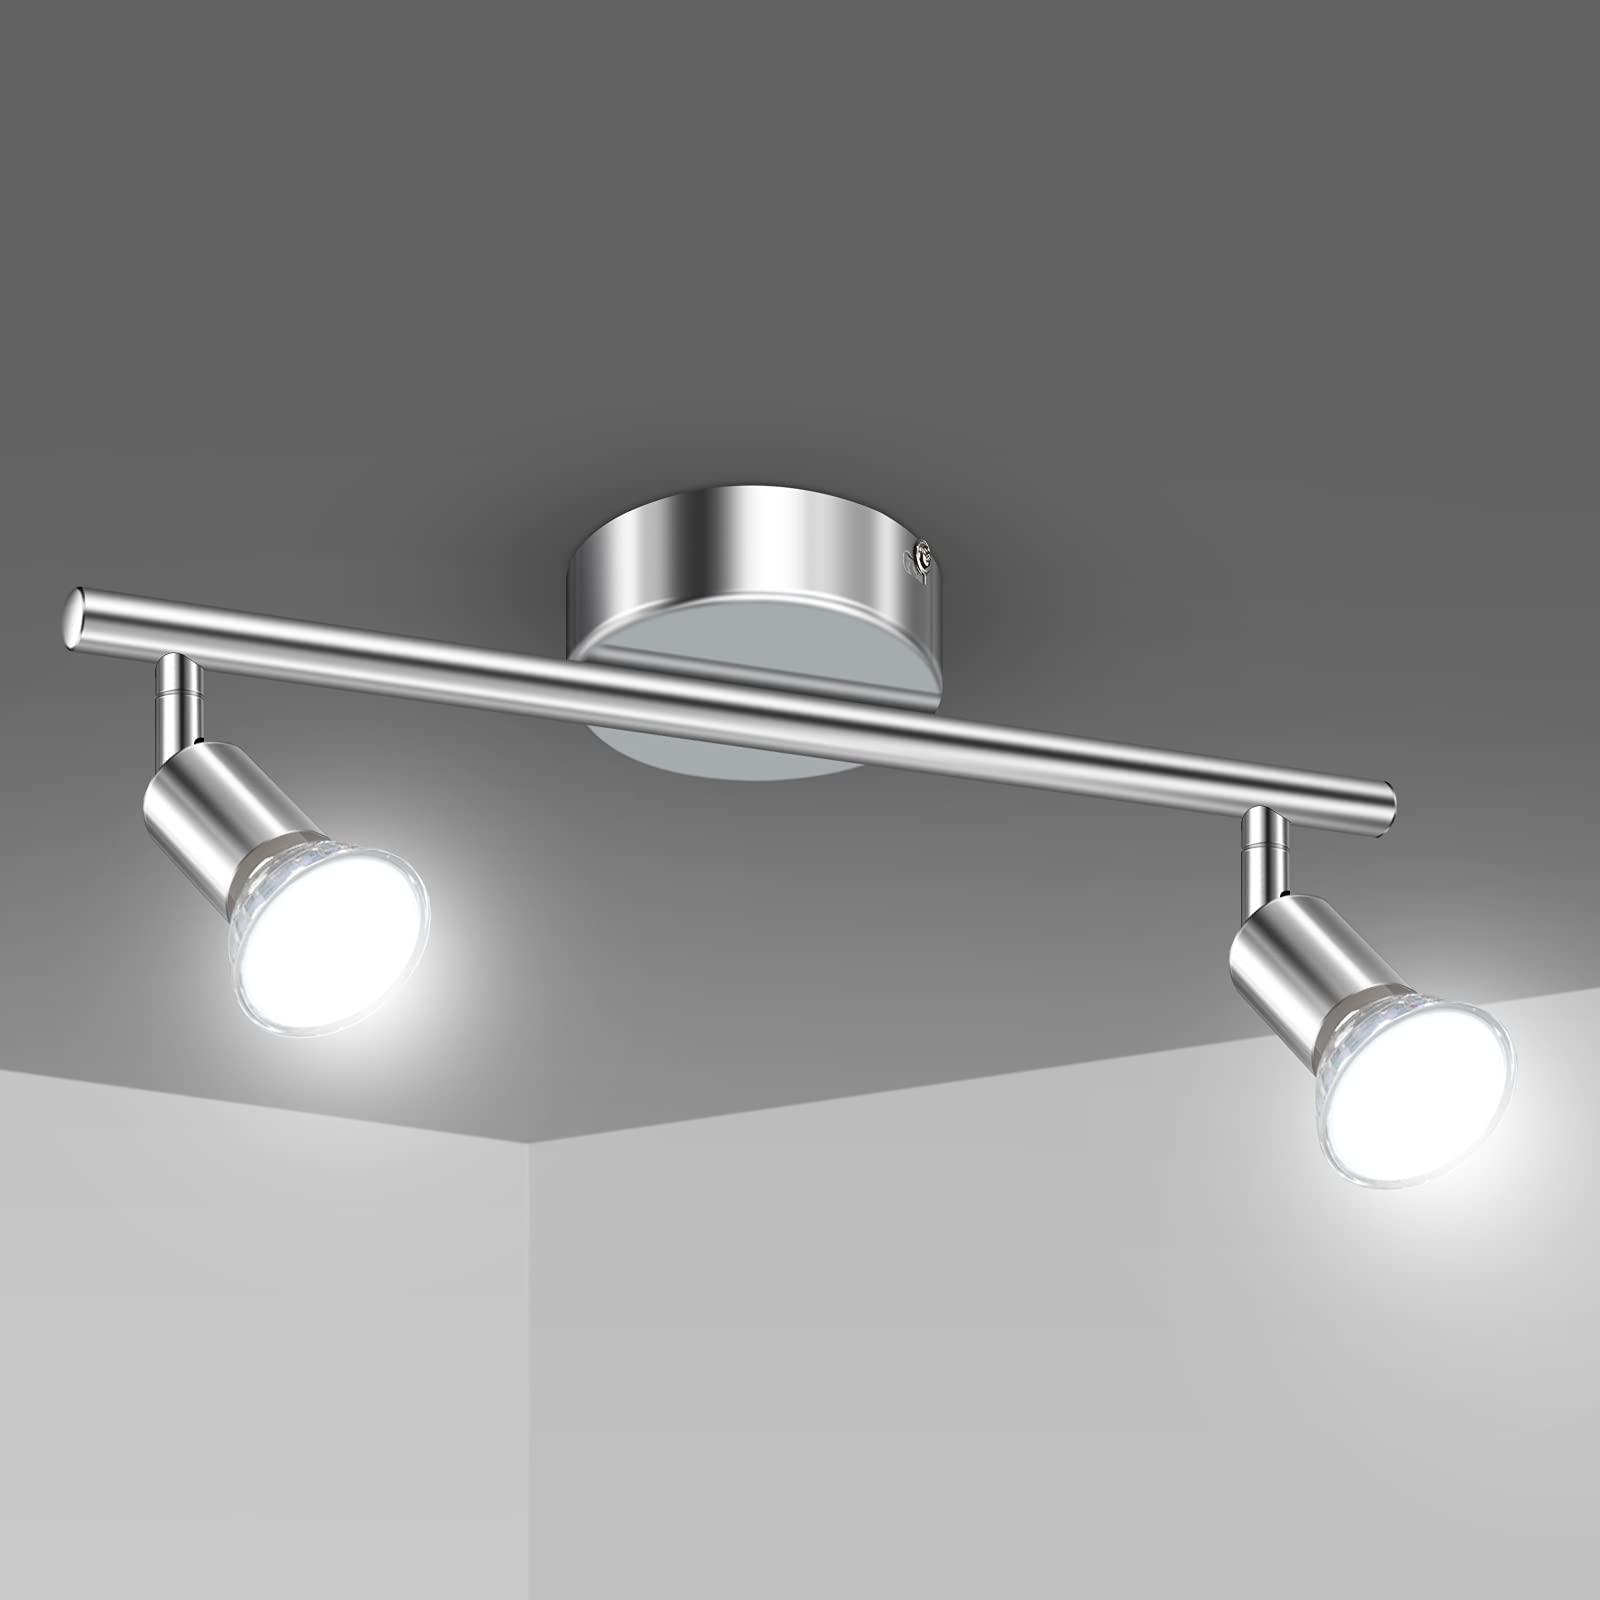 Uchrolls LED Ceiling Light Rotatable,2 Way Modern Ceiling Spotlight for Kitchen, Living Room and Bedroom, Complete with 2X 4W GU10 LED Light Bulbs (450LM, Cool White)- White Chrome